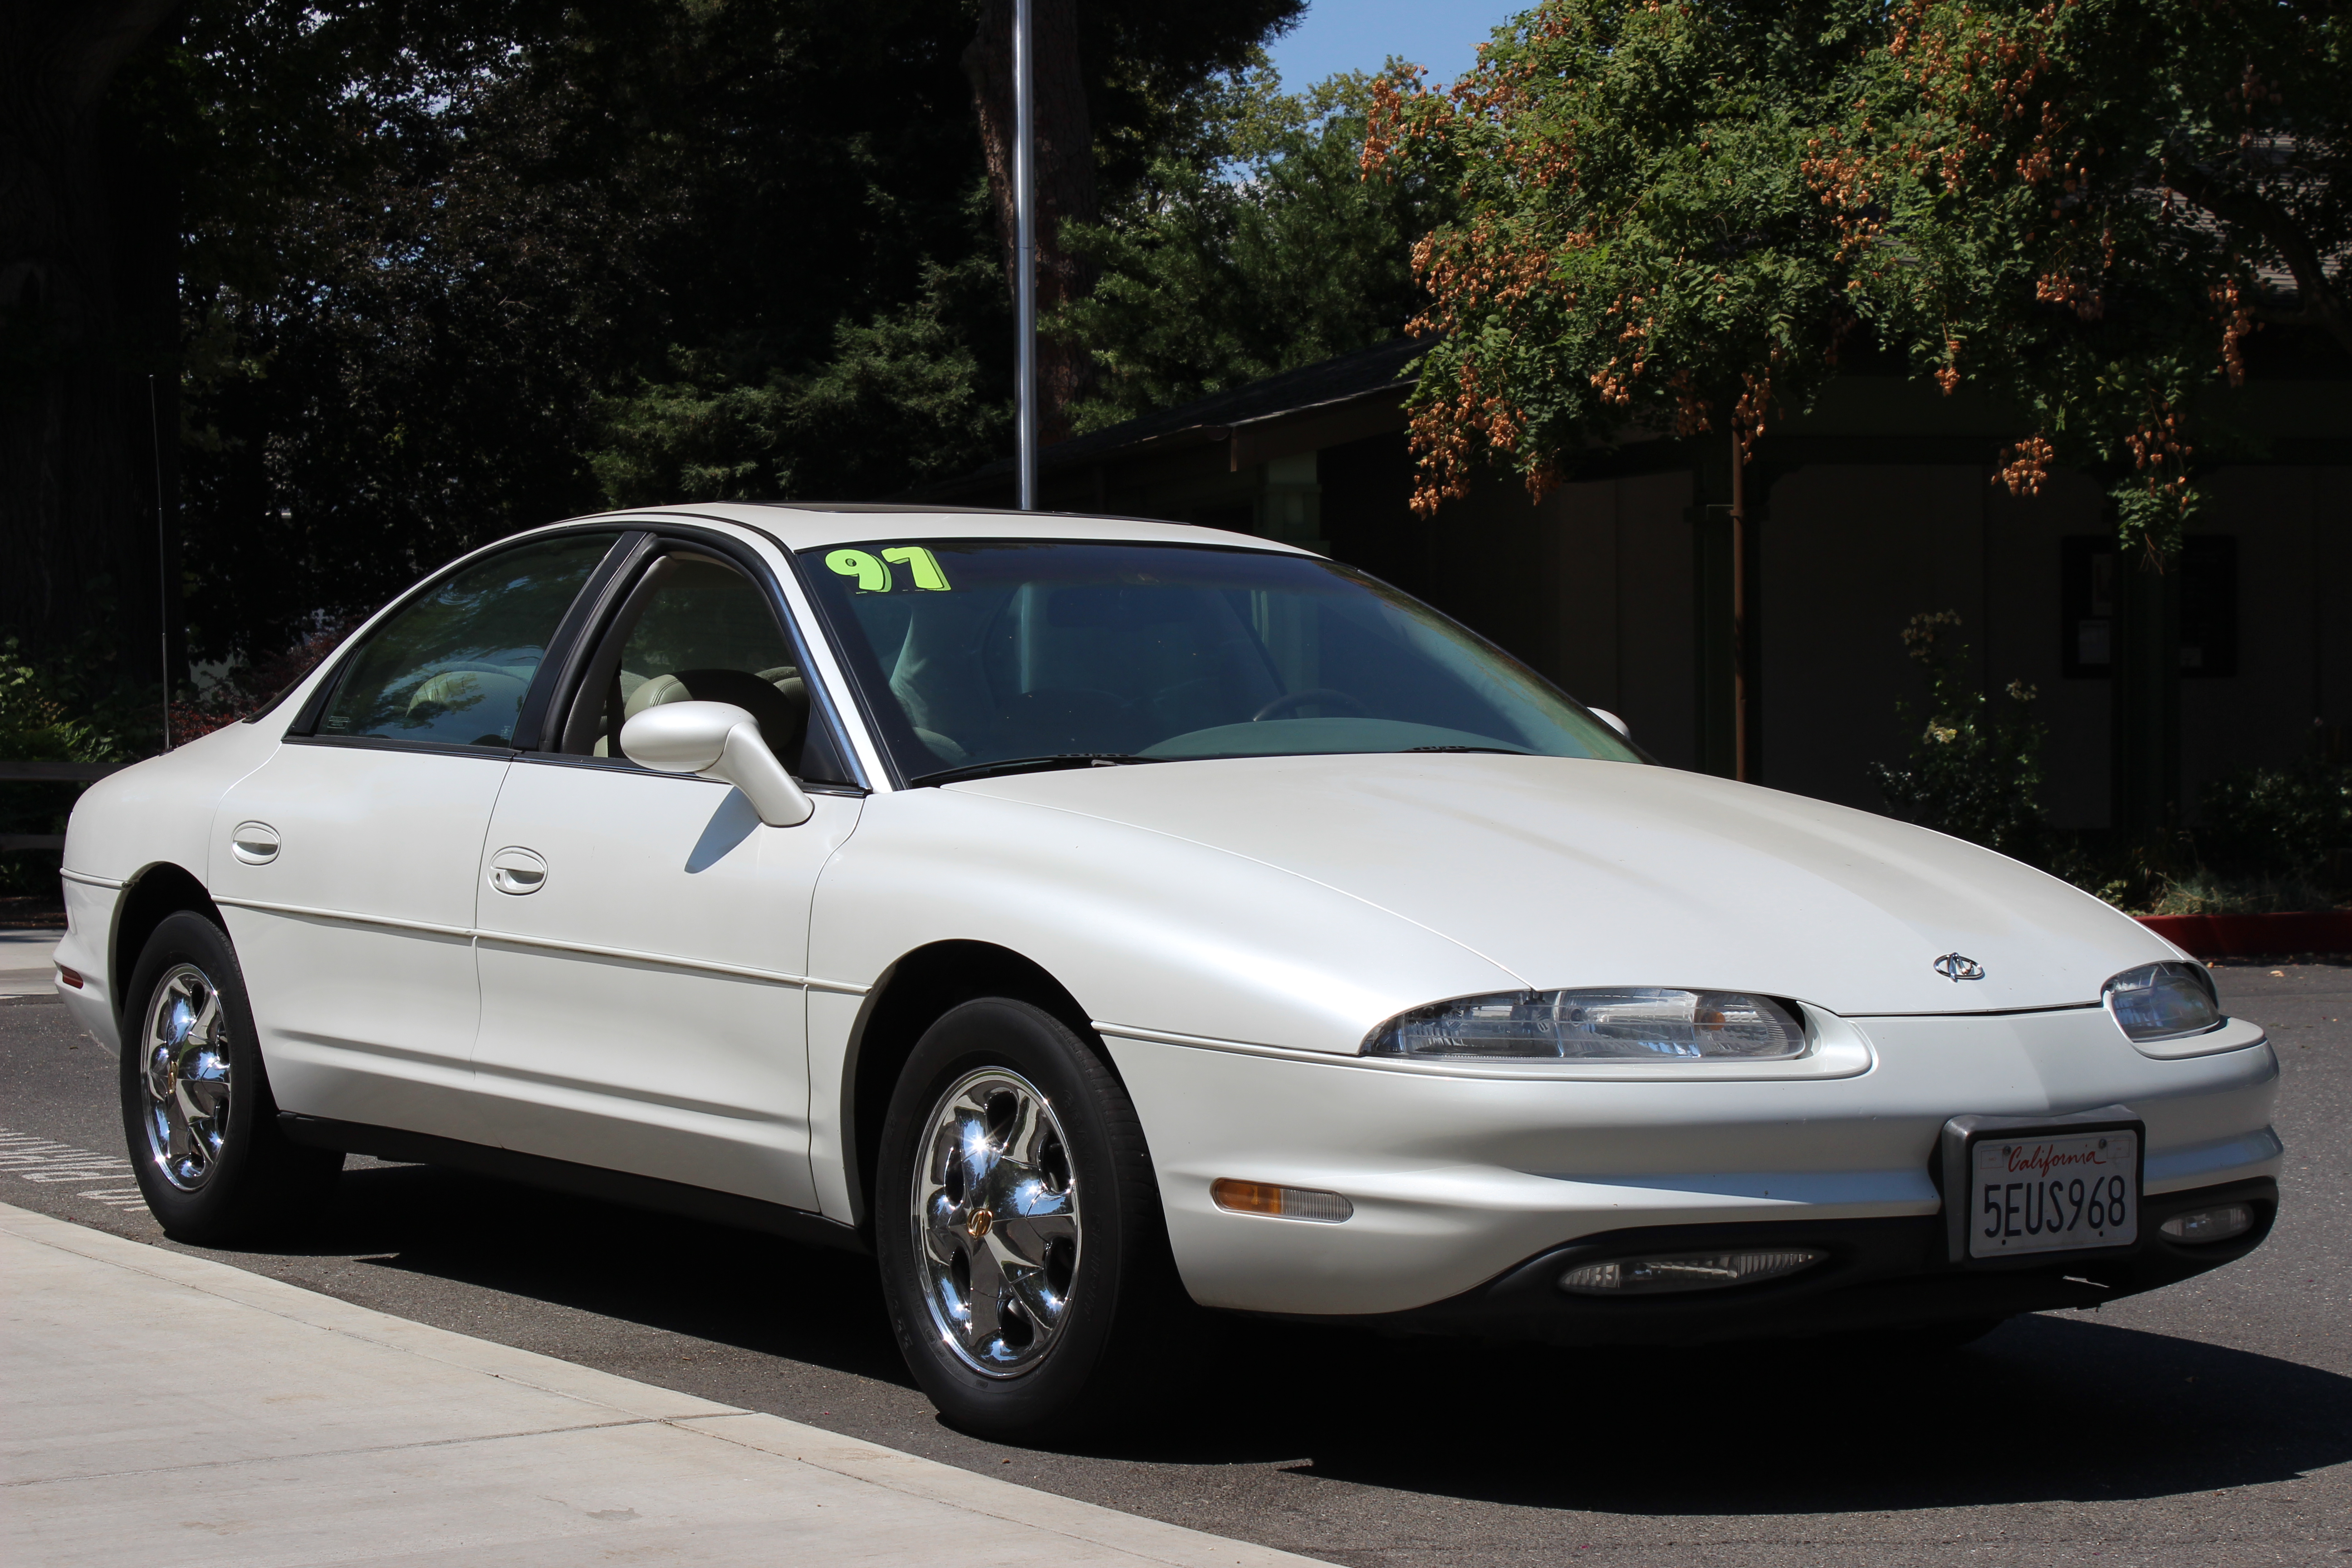 1997 OLDSMOBILE AURORA V8 ..THE POWER BEHIND INDY...HANDOUT STYLE BROCHURE 